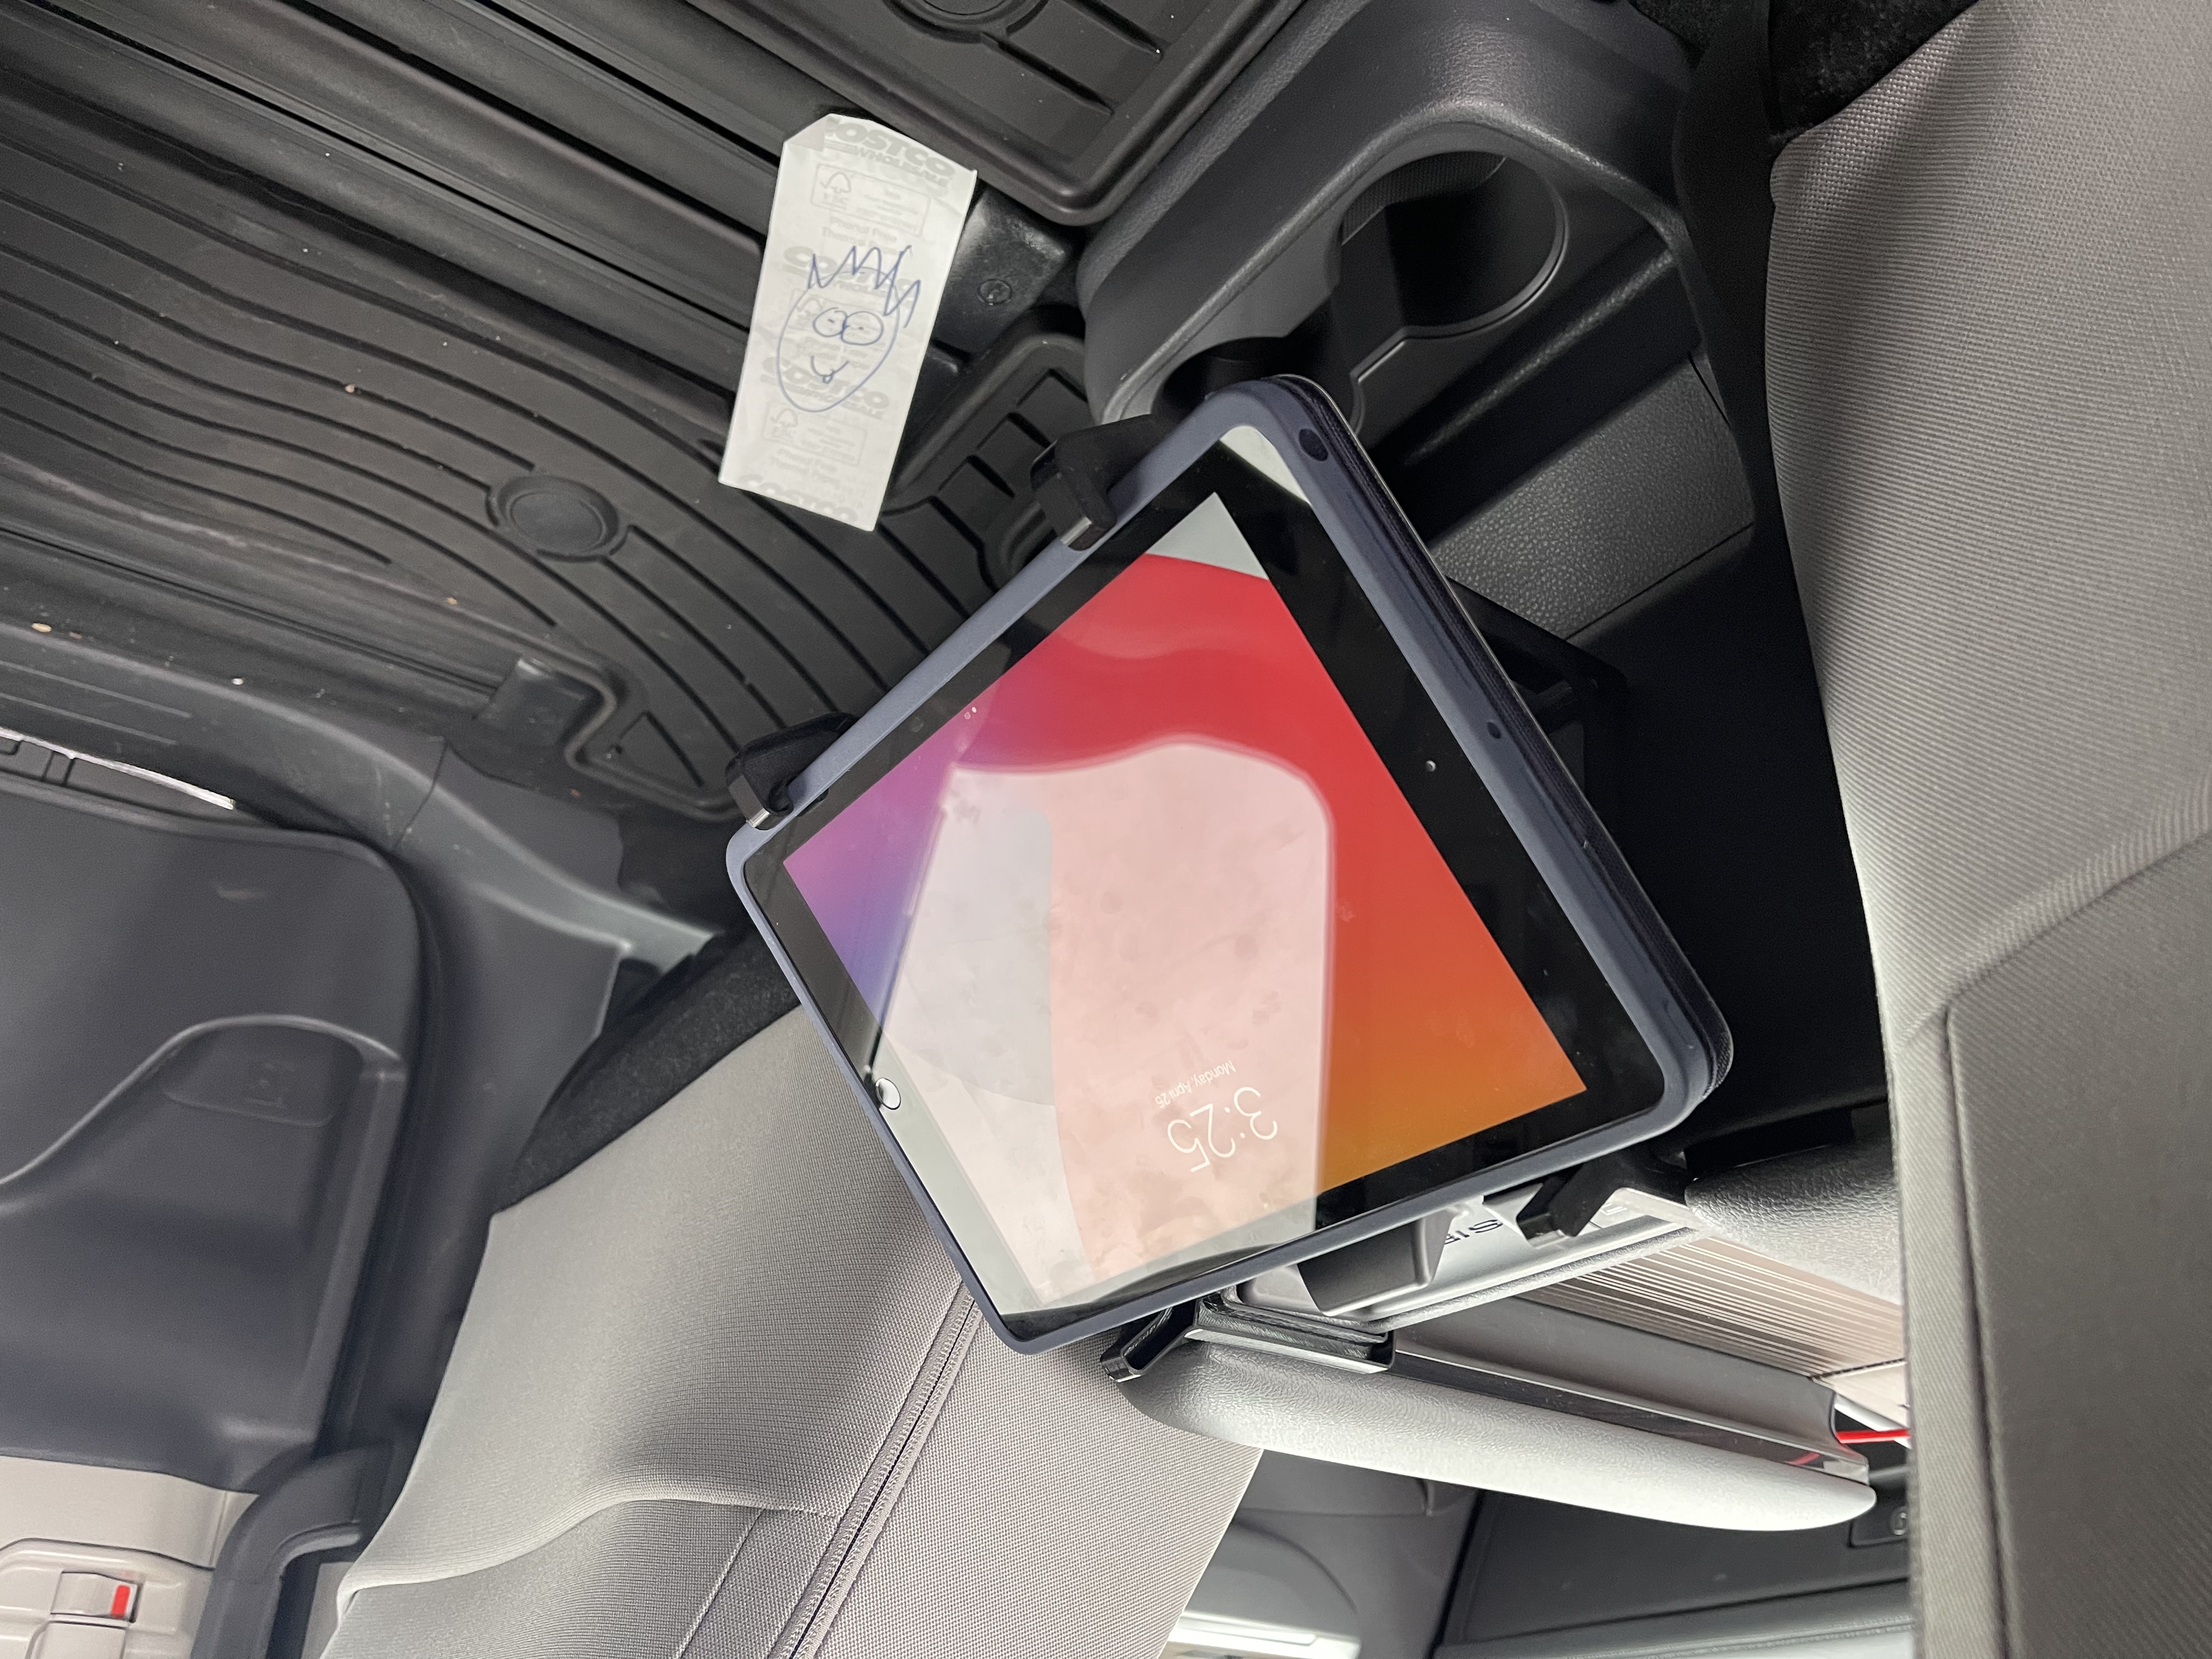 Console tablet holder for Toyota Sienna